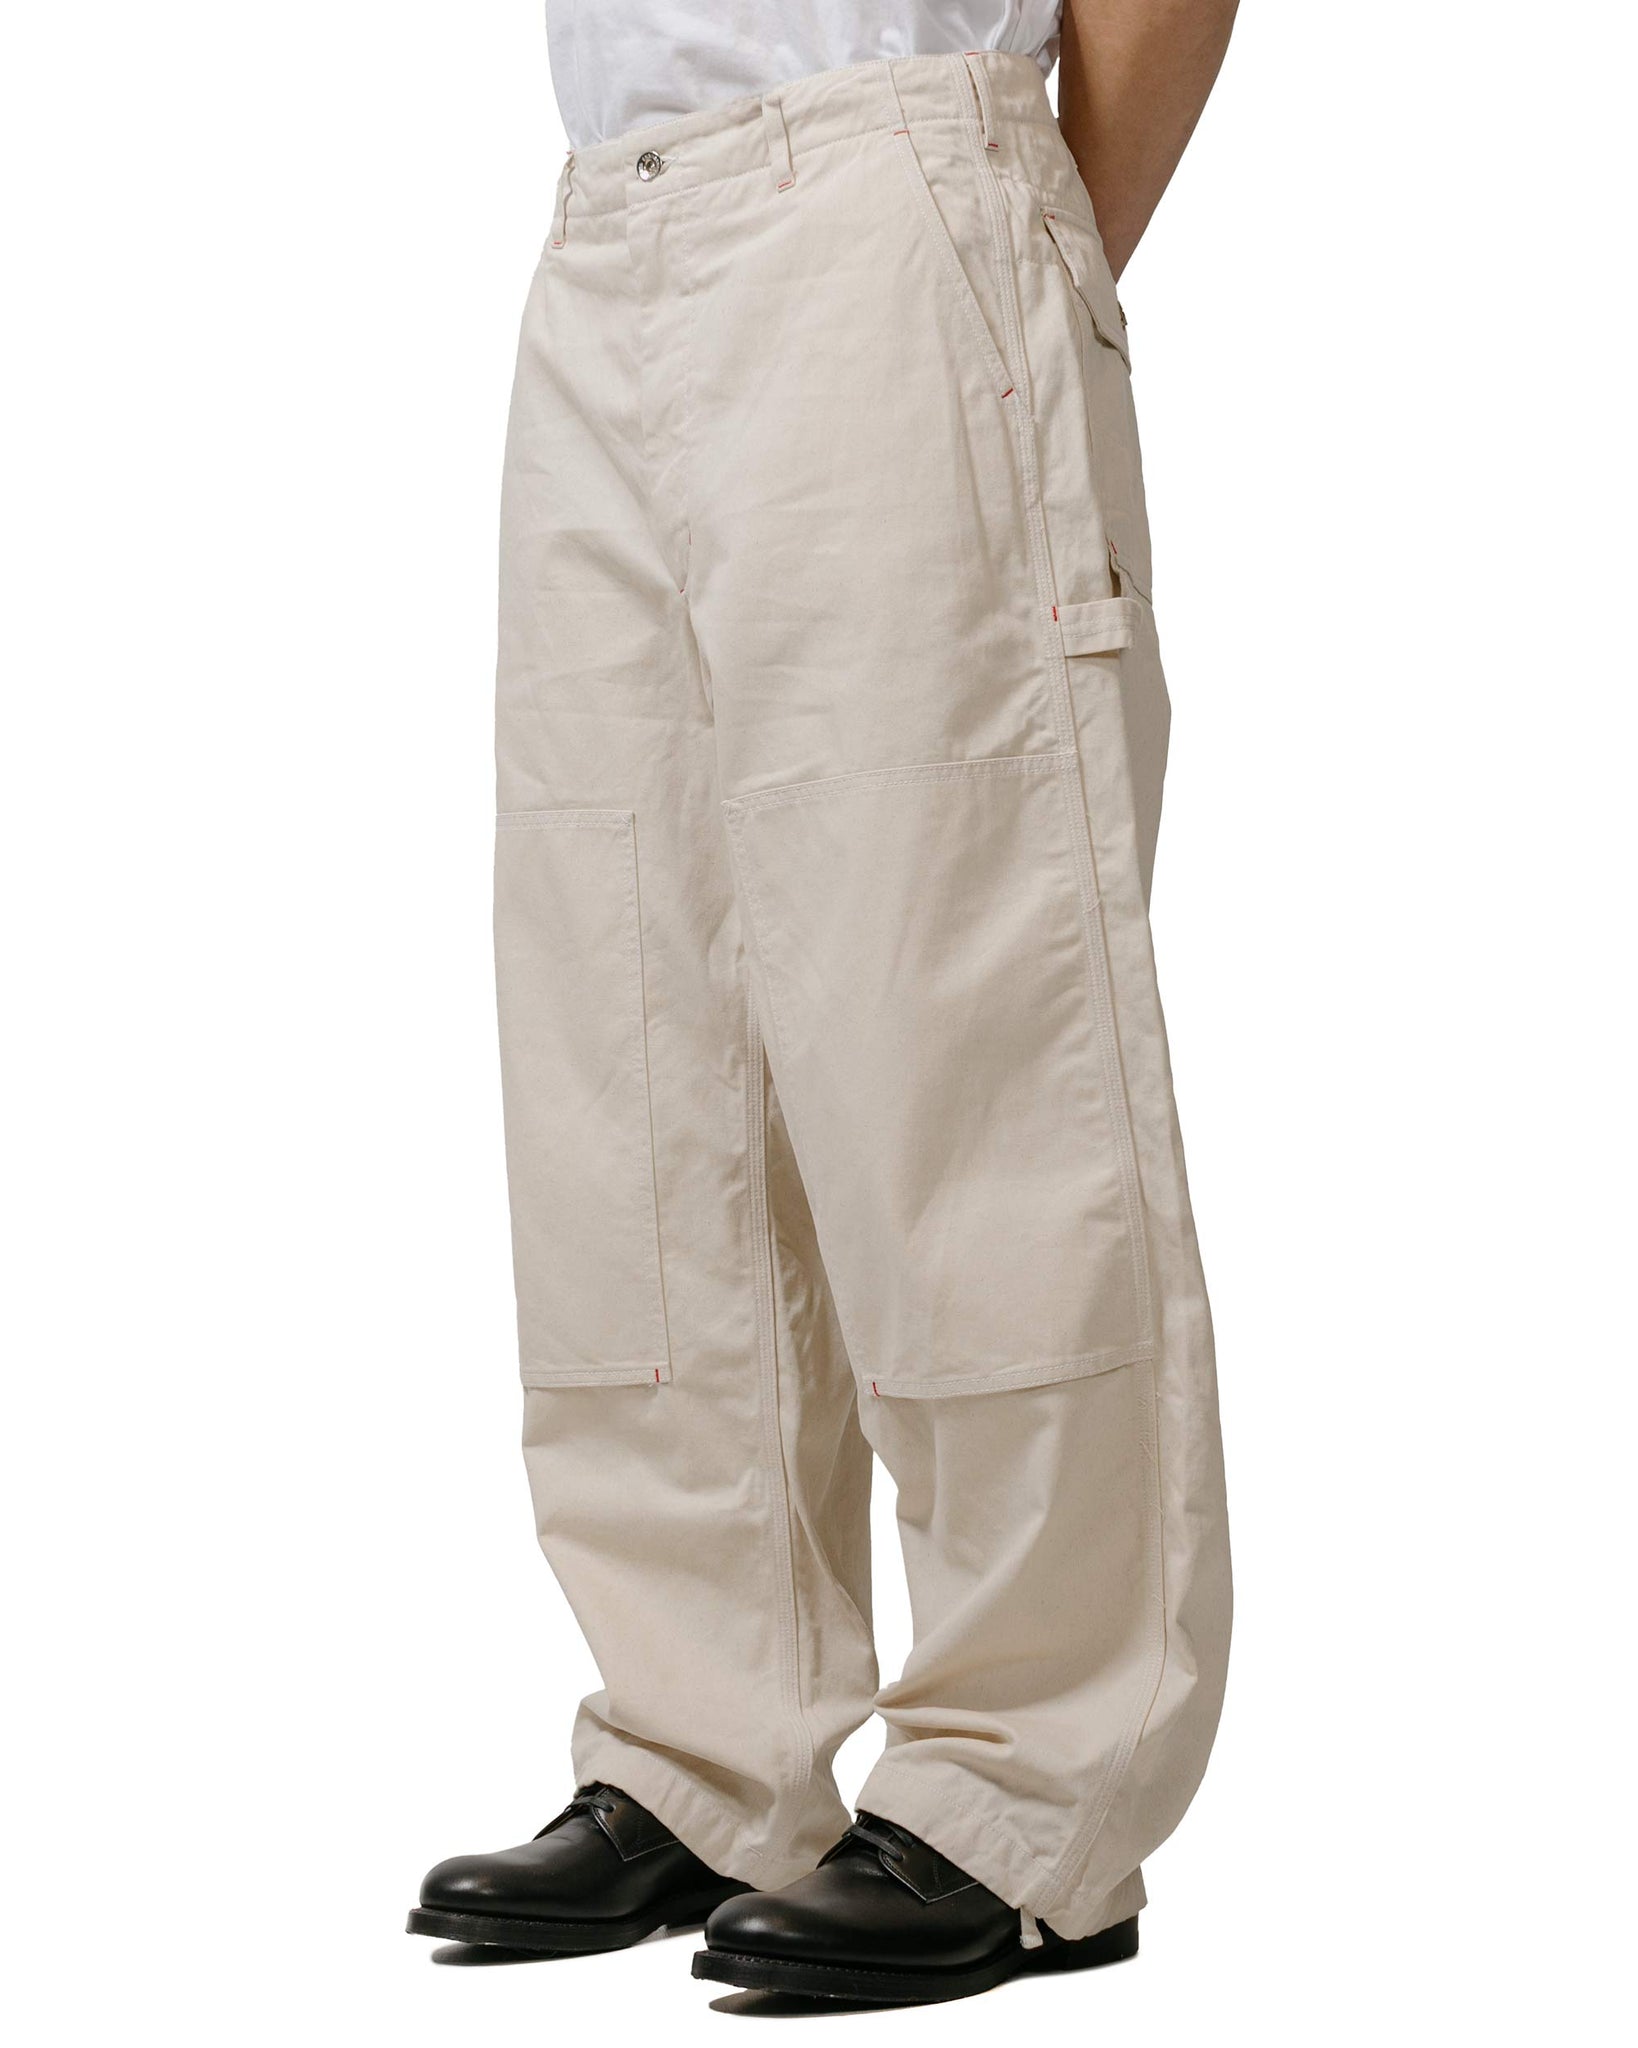 Engineered Garments Painter Pant Natural Chino Twill model front